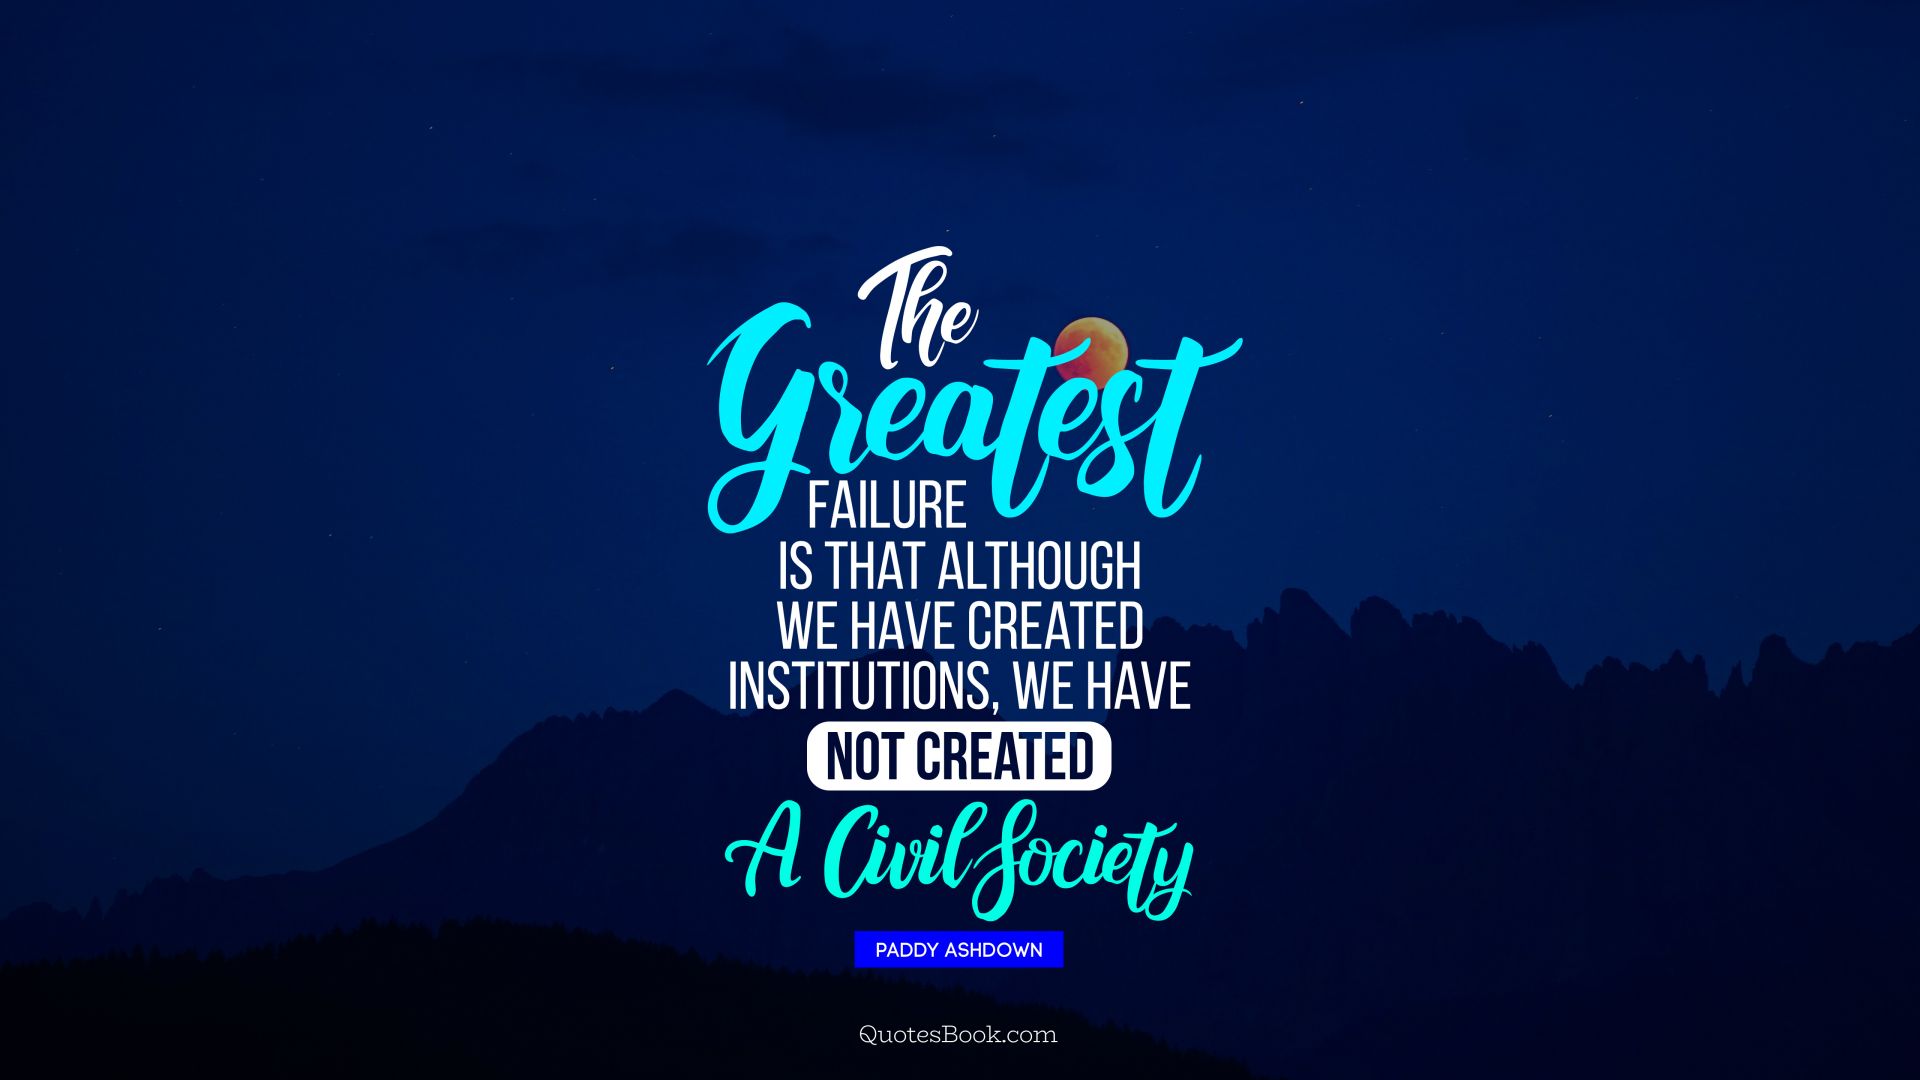 The greatest failure is that although we have created institutions, we have not created a civil society.. - Quote by Paddy Ashdown